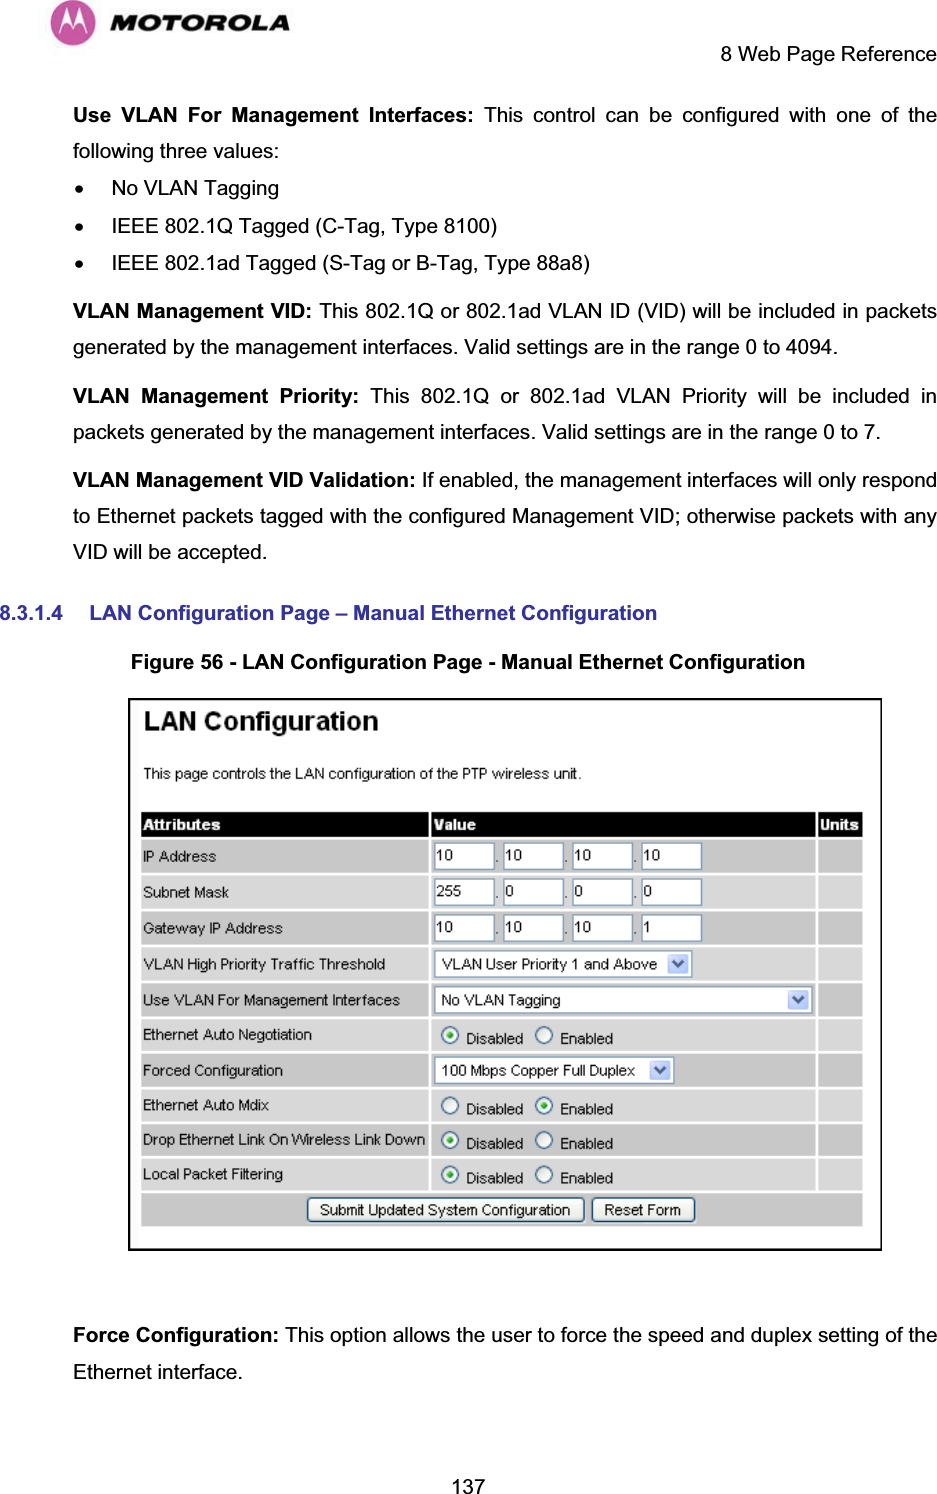     8 Web Page Reference  137Use VLAN For Management Interfaces: This control can be configured with one of the following three values: x  No VLAN Tagging x  IEEE 802.1Q Tagged (C-Tag, Type 8100) x  IEEE 802.1ad Tagged (S-Tag or B-Tag, Type 88a8) VLAN Management VID: This 802.1Q or 802.1ad VLAN ID (VID) will be included in packets generated by the management interfaces. Valid settings are in the range 0 to 4094. VLAN Management Priority: This 802.1Q or 802.1ad VLAN Priority will be included in packets generated by the management interfaces. Valid settings are in the range 0 to 7. VLAN Management VID Validation: If enabled, the management interfaces will only respond to Ethernet packets tagged with the configured Management VID; otherwise packets with any VID will be accepted. 8.3.1.4  LAN Configuration Page – Manual Ethernet Configuration Figure 56 - LAN Configuration Page - Manual Ethernet Configuration   Force Configuration: This option allows the user to force the speed and duplex setting of the Ethernet interface. 